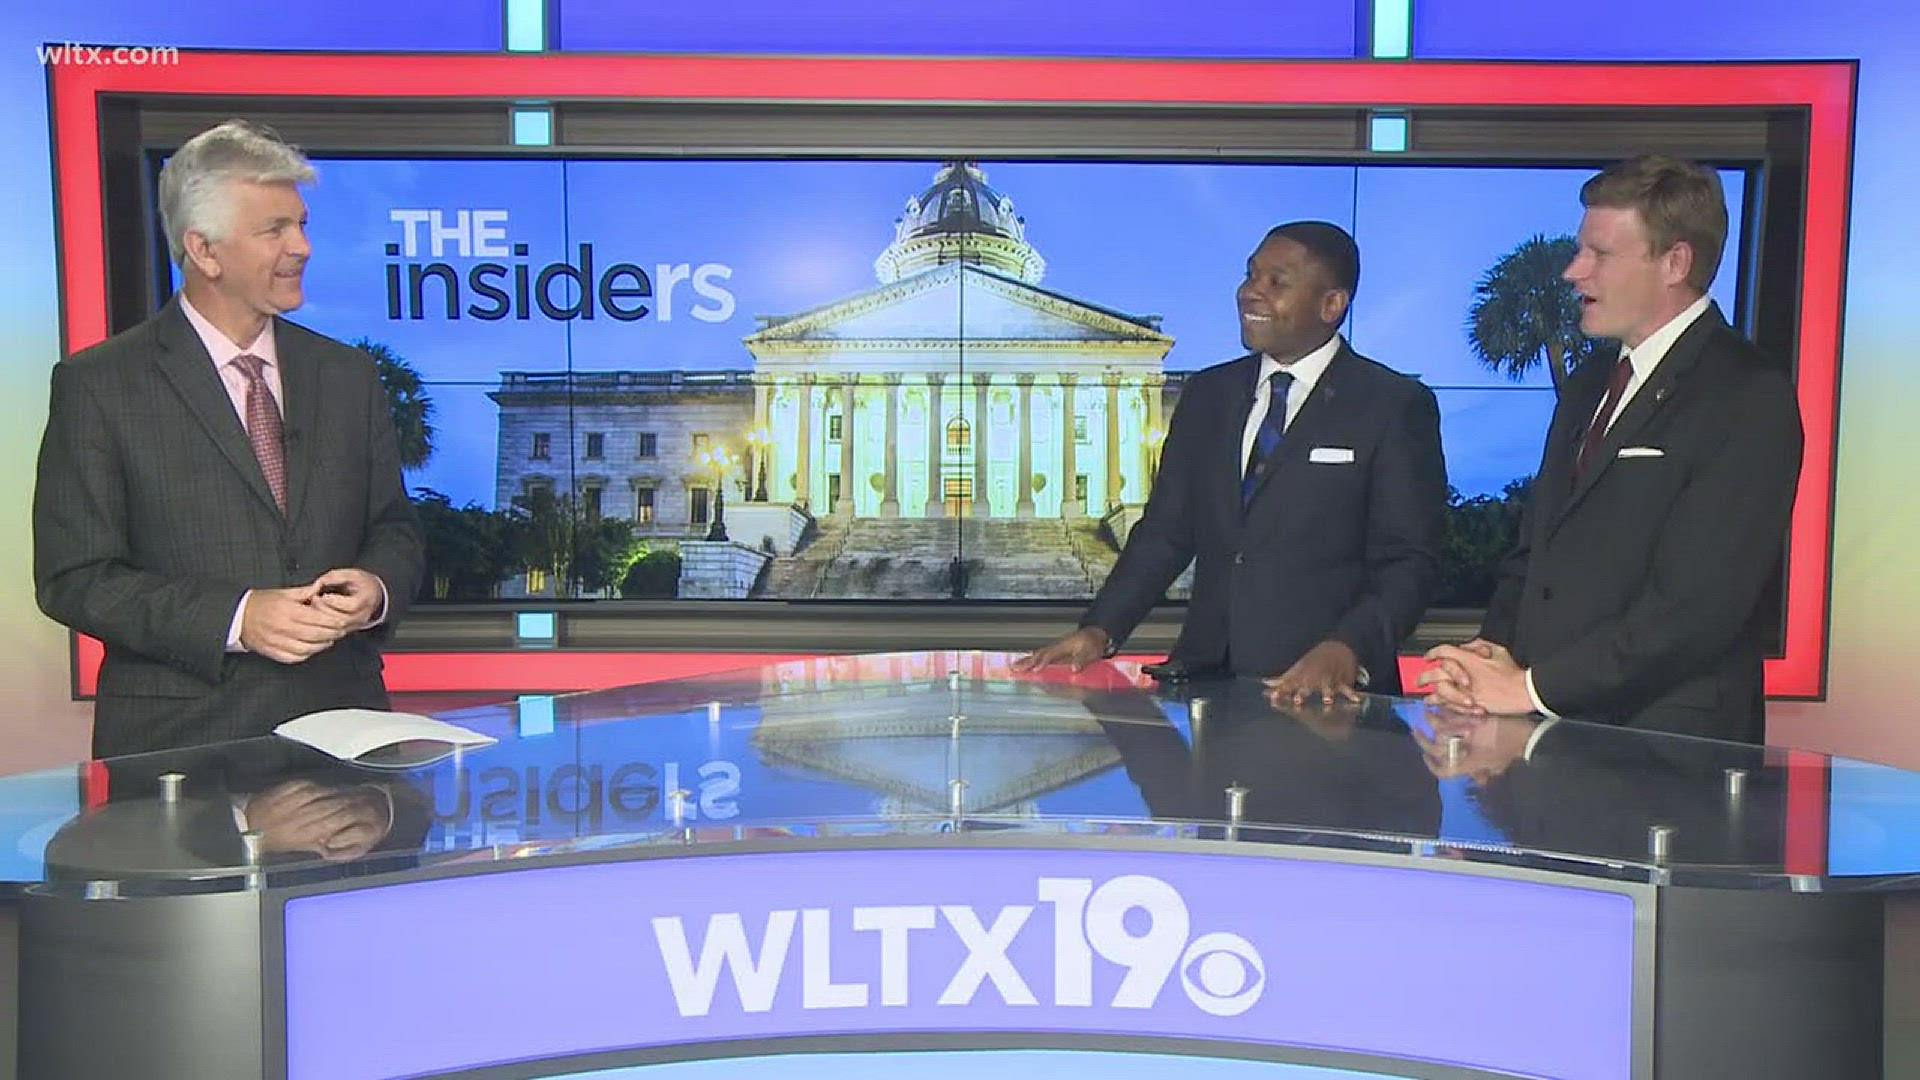 The Insiders talk politics, concentrating on the recent primaries